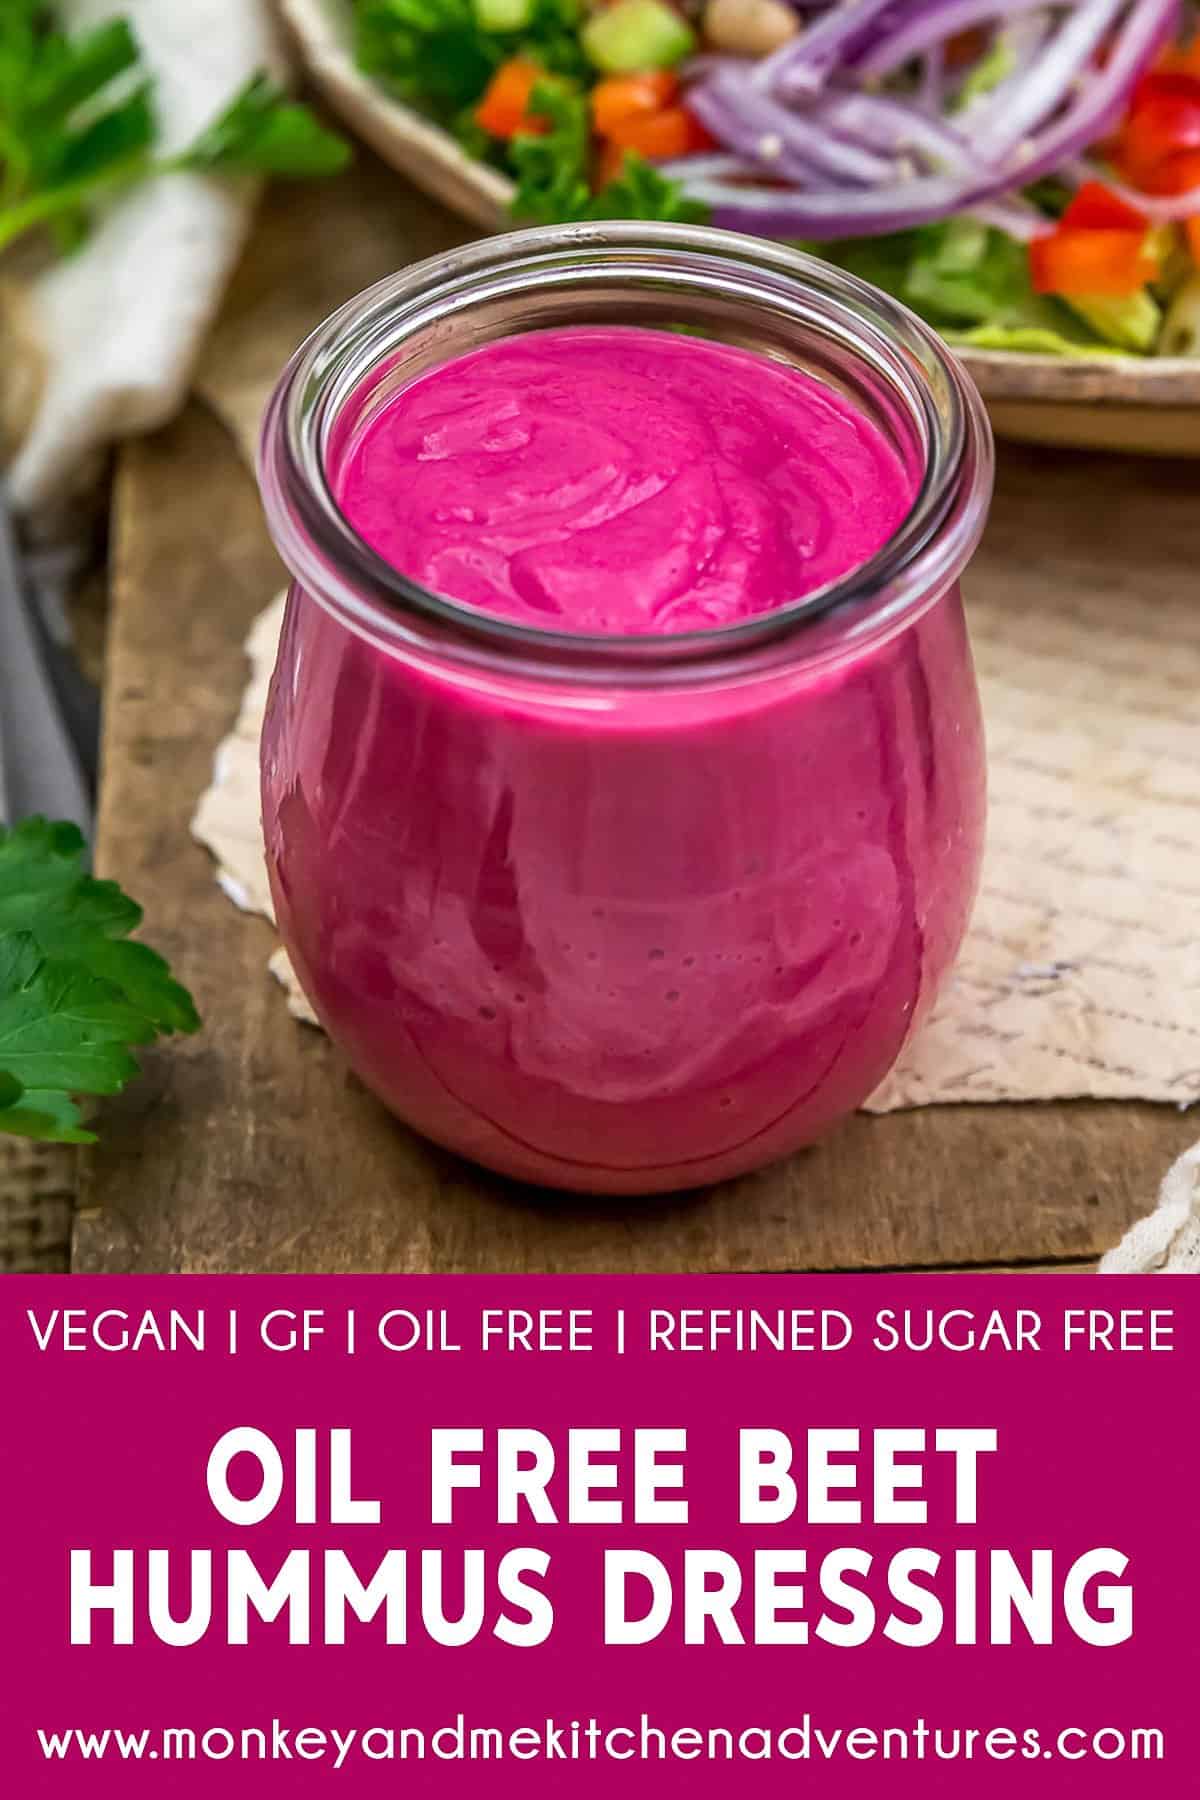 Oil Free Beet Hummus Dressing with text description